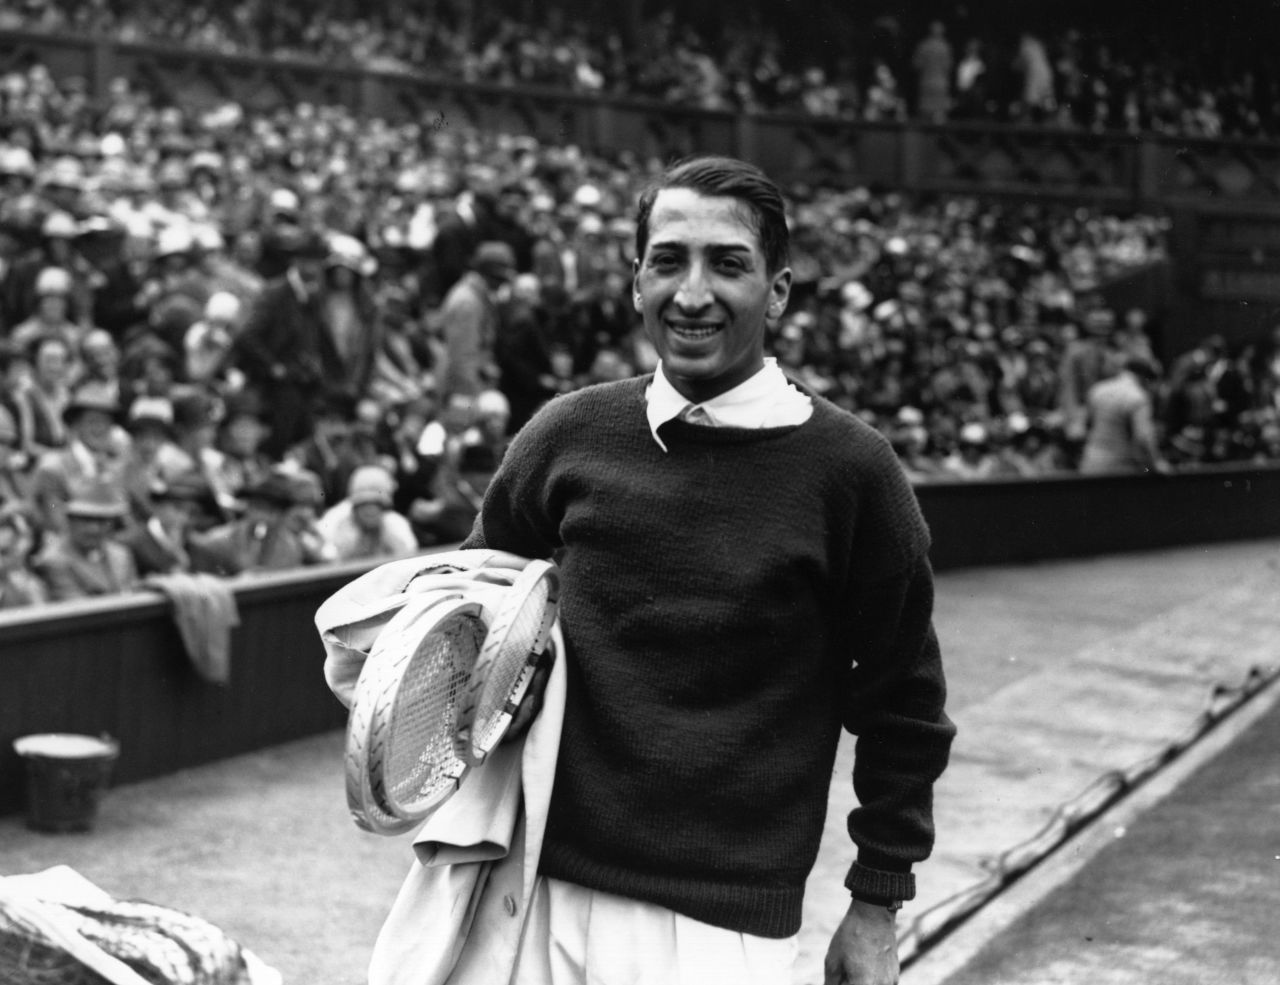 Known as "The Crocodile" -- the logo on his shirt would become the symbol of his clothing label -- Lacoste also won the Wimbledon title in 1928, beating Cochet in the final.